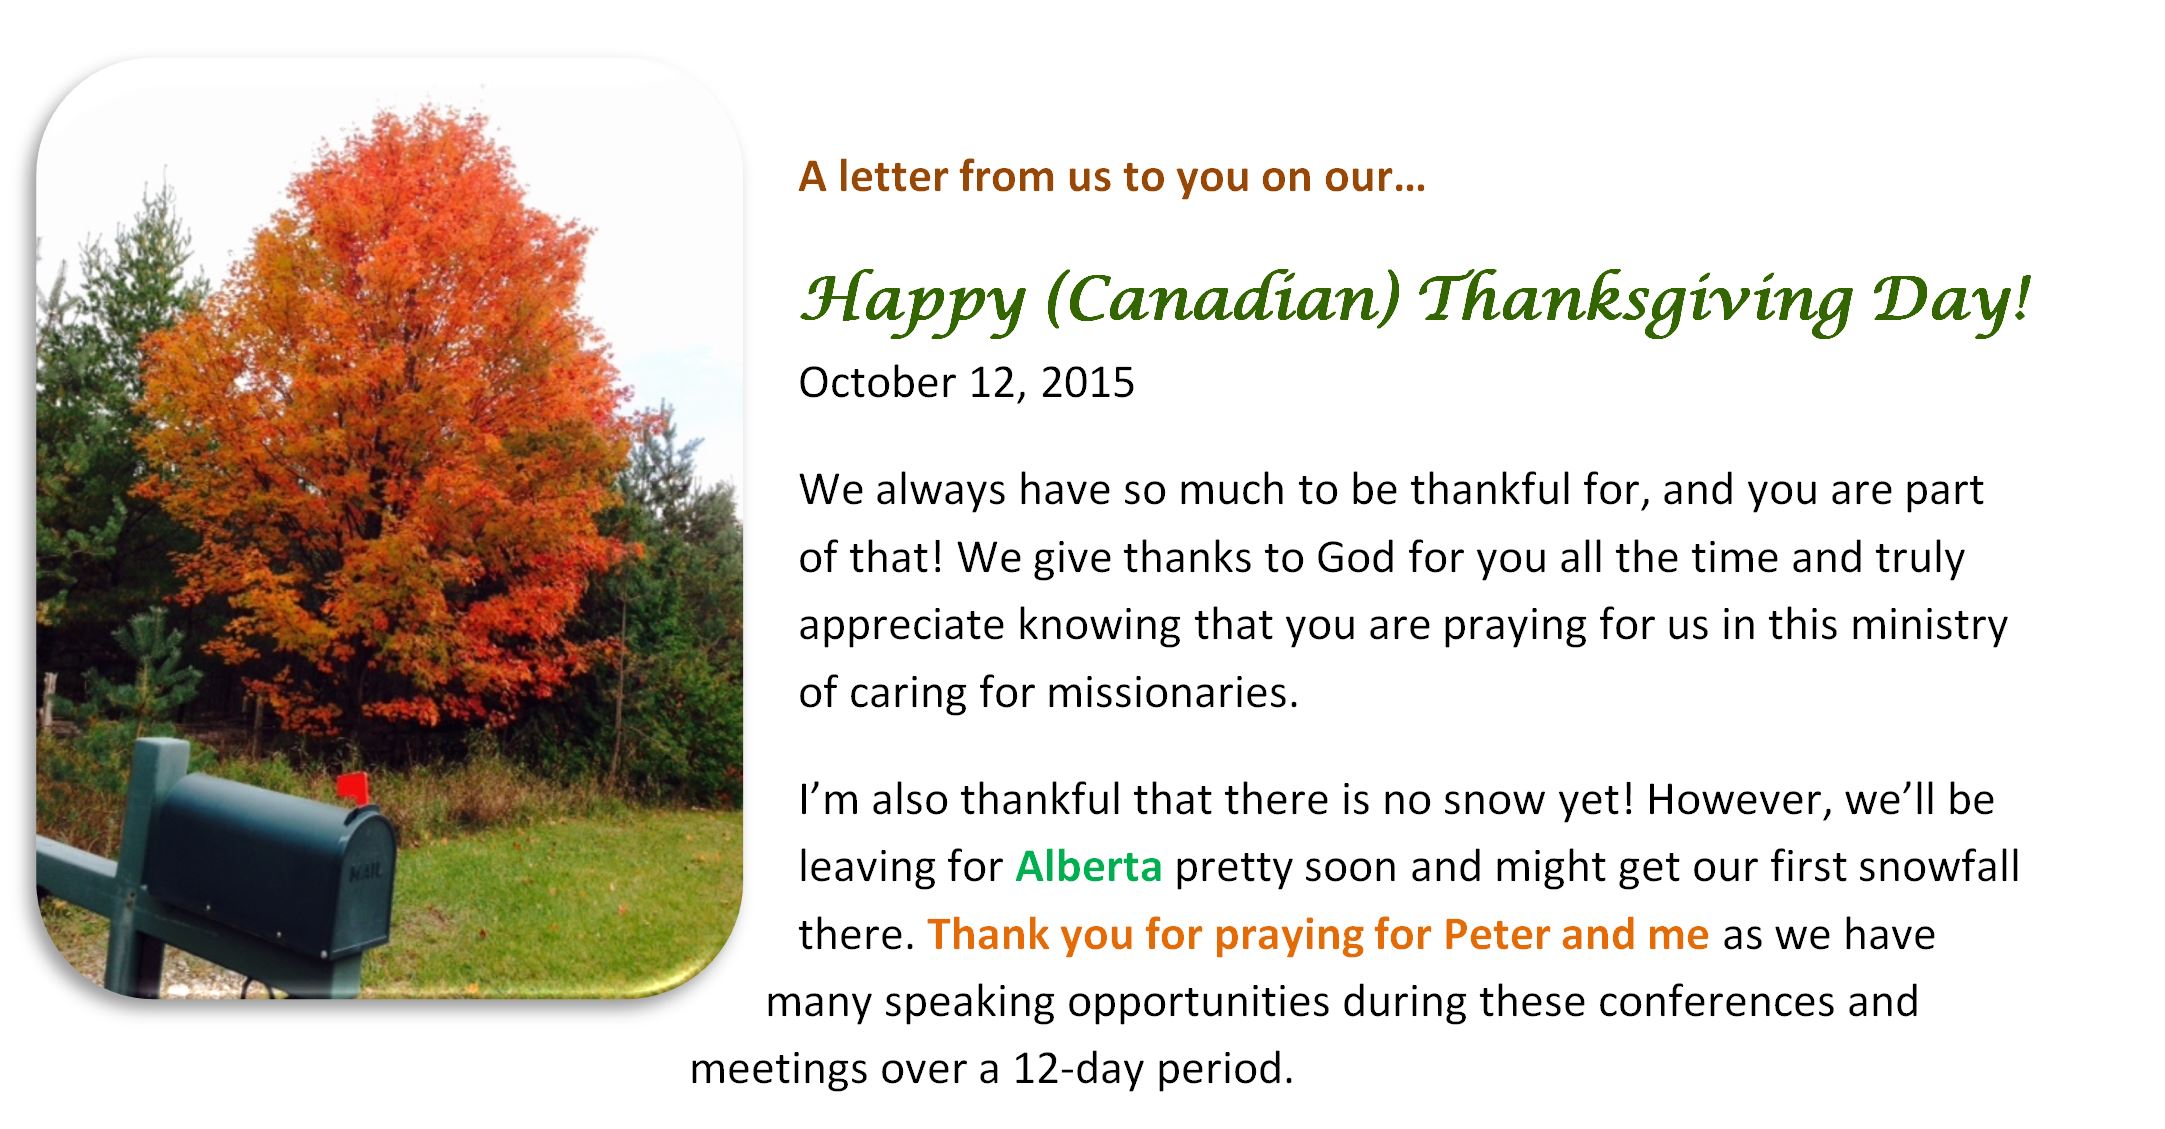 ¸¸.•*¨*••.¸¸ Happy Canadian Thanksgiving! ¸¸.•*¨*••.¸¸